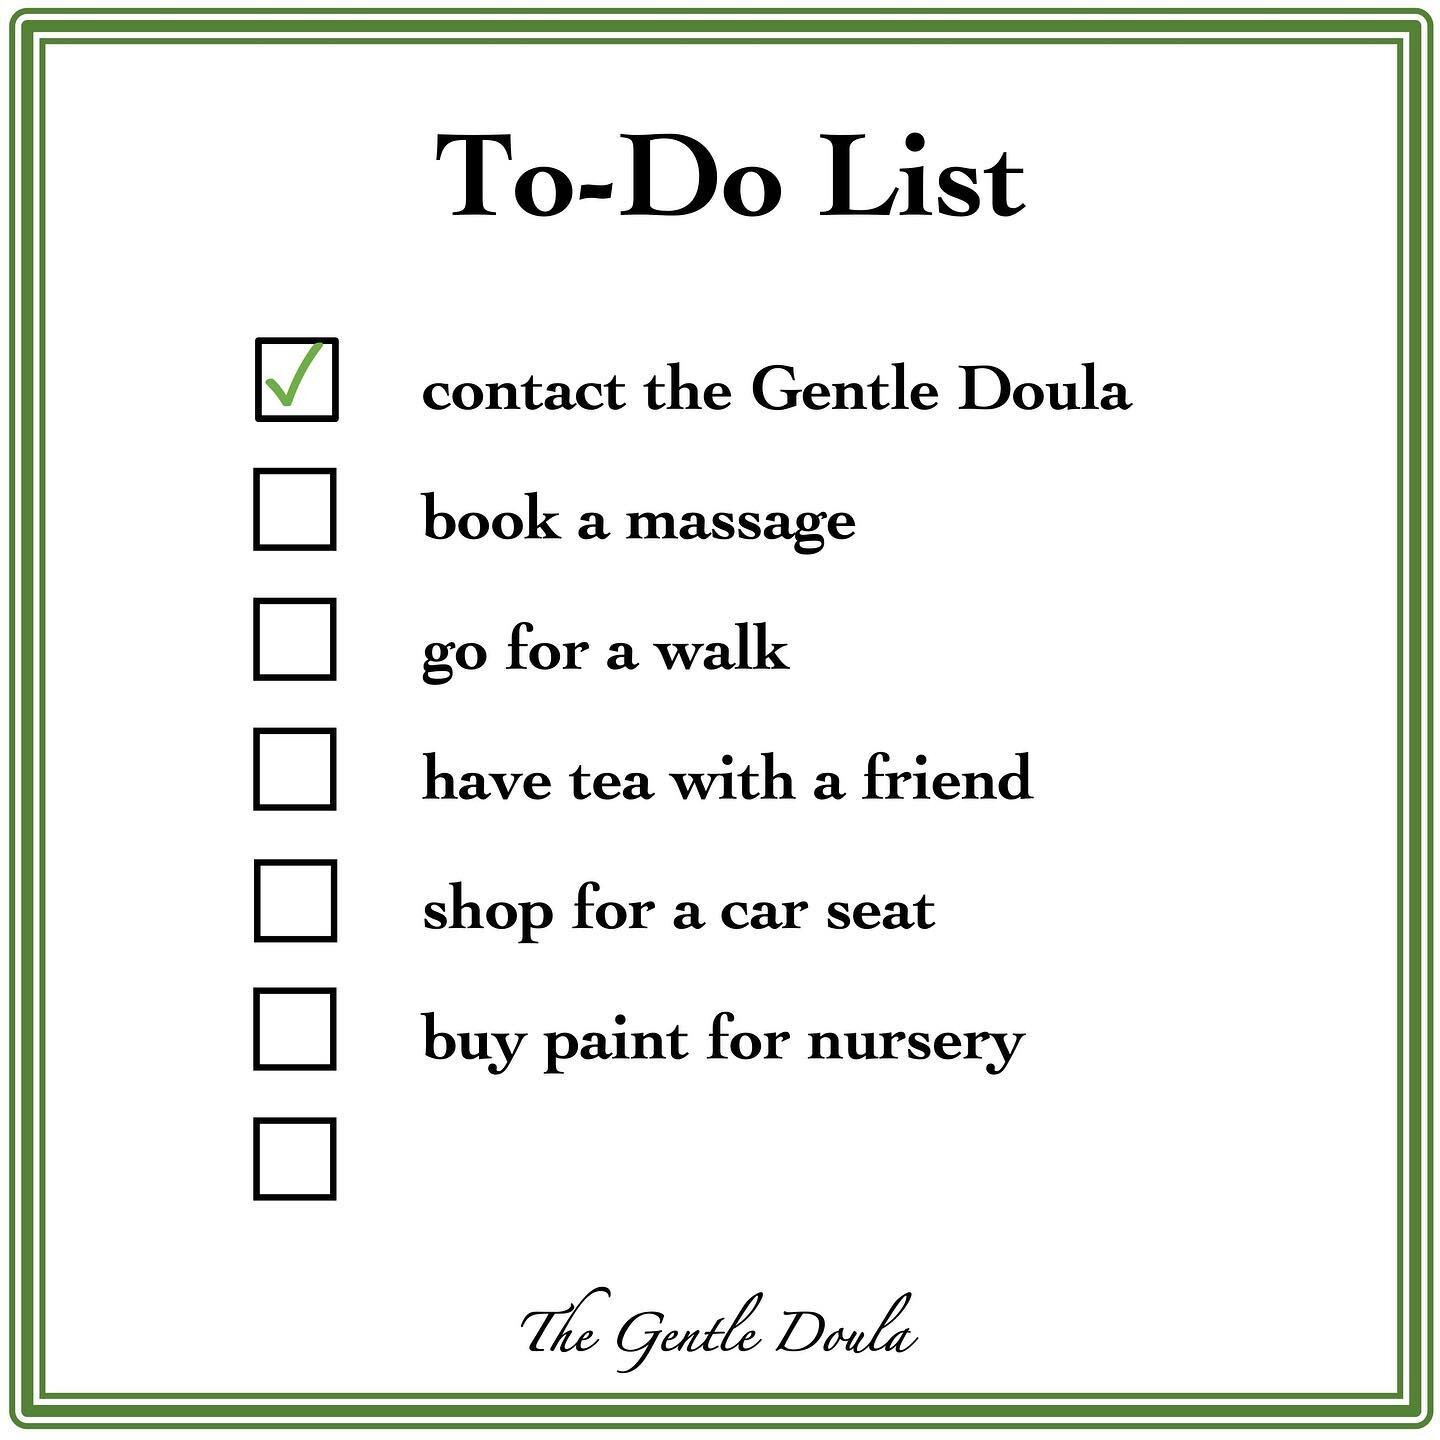 Happy new year! Whether you&rsquo;re starting out fresh with new ideas and plans, or hoping to cross off some of your unfinished goals from 2023, I hope you&rsquo;ll consider adding a call to the Gentle Doula to your list. 
.
Doula support is persona